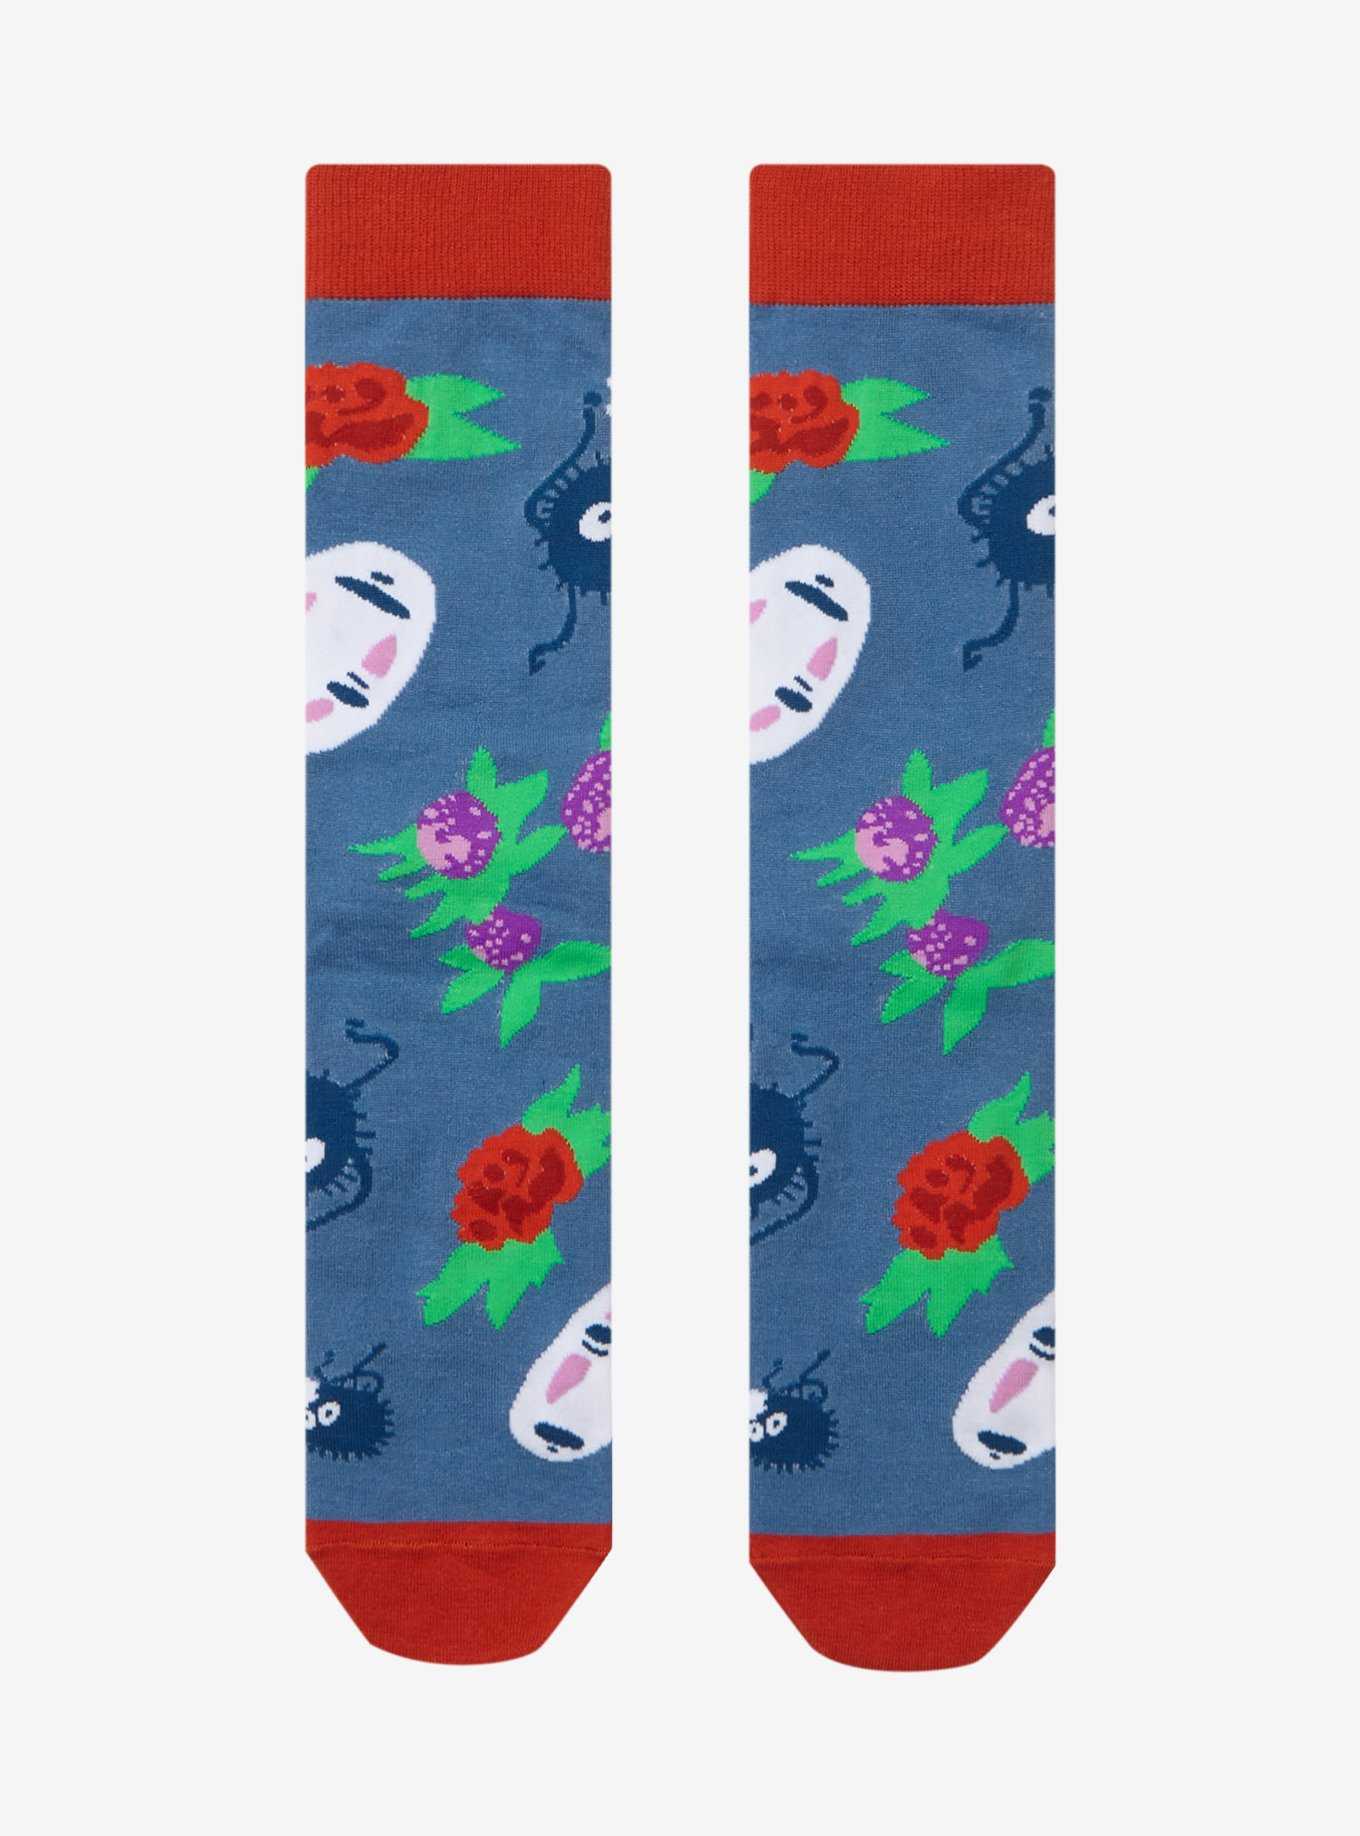 Studio Ghibli Spirited Away No-Face & Soot Sprites Allover Print Crew Socks - BoxLunch Exclusive, , hi-res